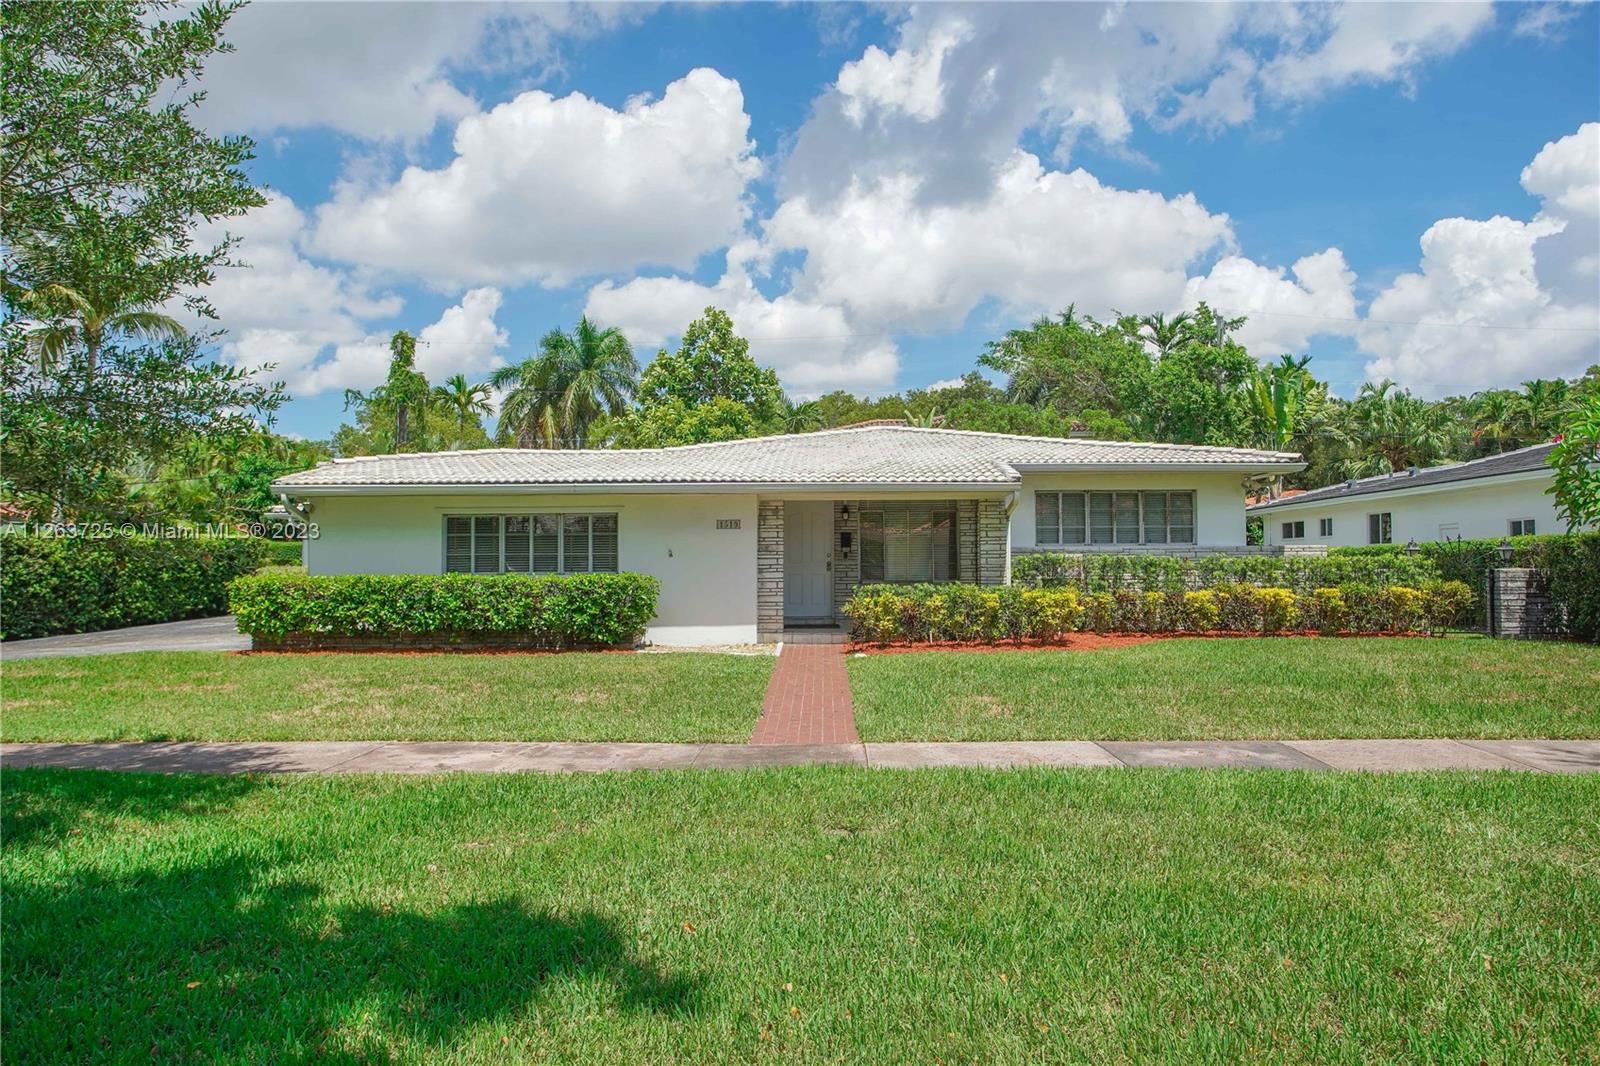 LOCATION!!! LOCATION!!! PRICE ADJUSTED for this great opportunity to transform this spacious 3117 adj Sq Ft home with great curb appeal into the "Home of you Dreams in beautiful Coral Gables". This home, Sold-As-Is, sits on a street filled with beautiful trees and beautiful homes.  Close to great schools, 2 minutes to University of Miami, 2 minutes to Doctors Hospital, 20 minutes to Downtown Miami and to MIA, close to restaurants, shops, US1 and much more.  
Tremendous potential to update, expand or rebuild. Price includes plans for the remodeling transformation and are included as attachments. Room for pool. Easy to Show, see Brokers remarks for more information. Seller Motivated!